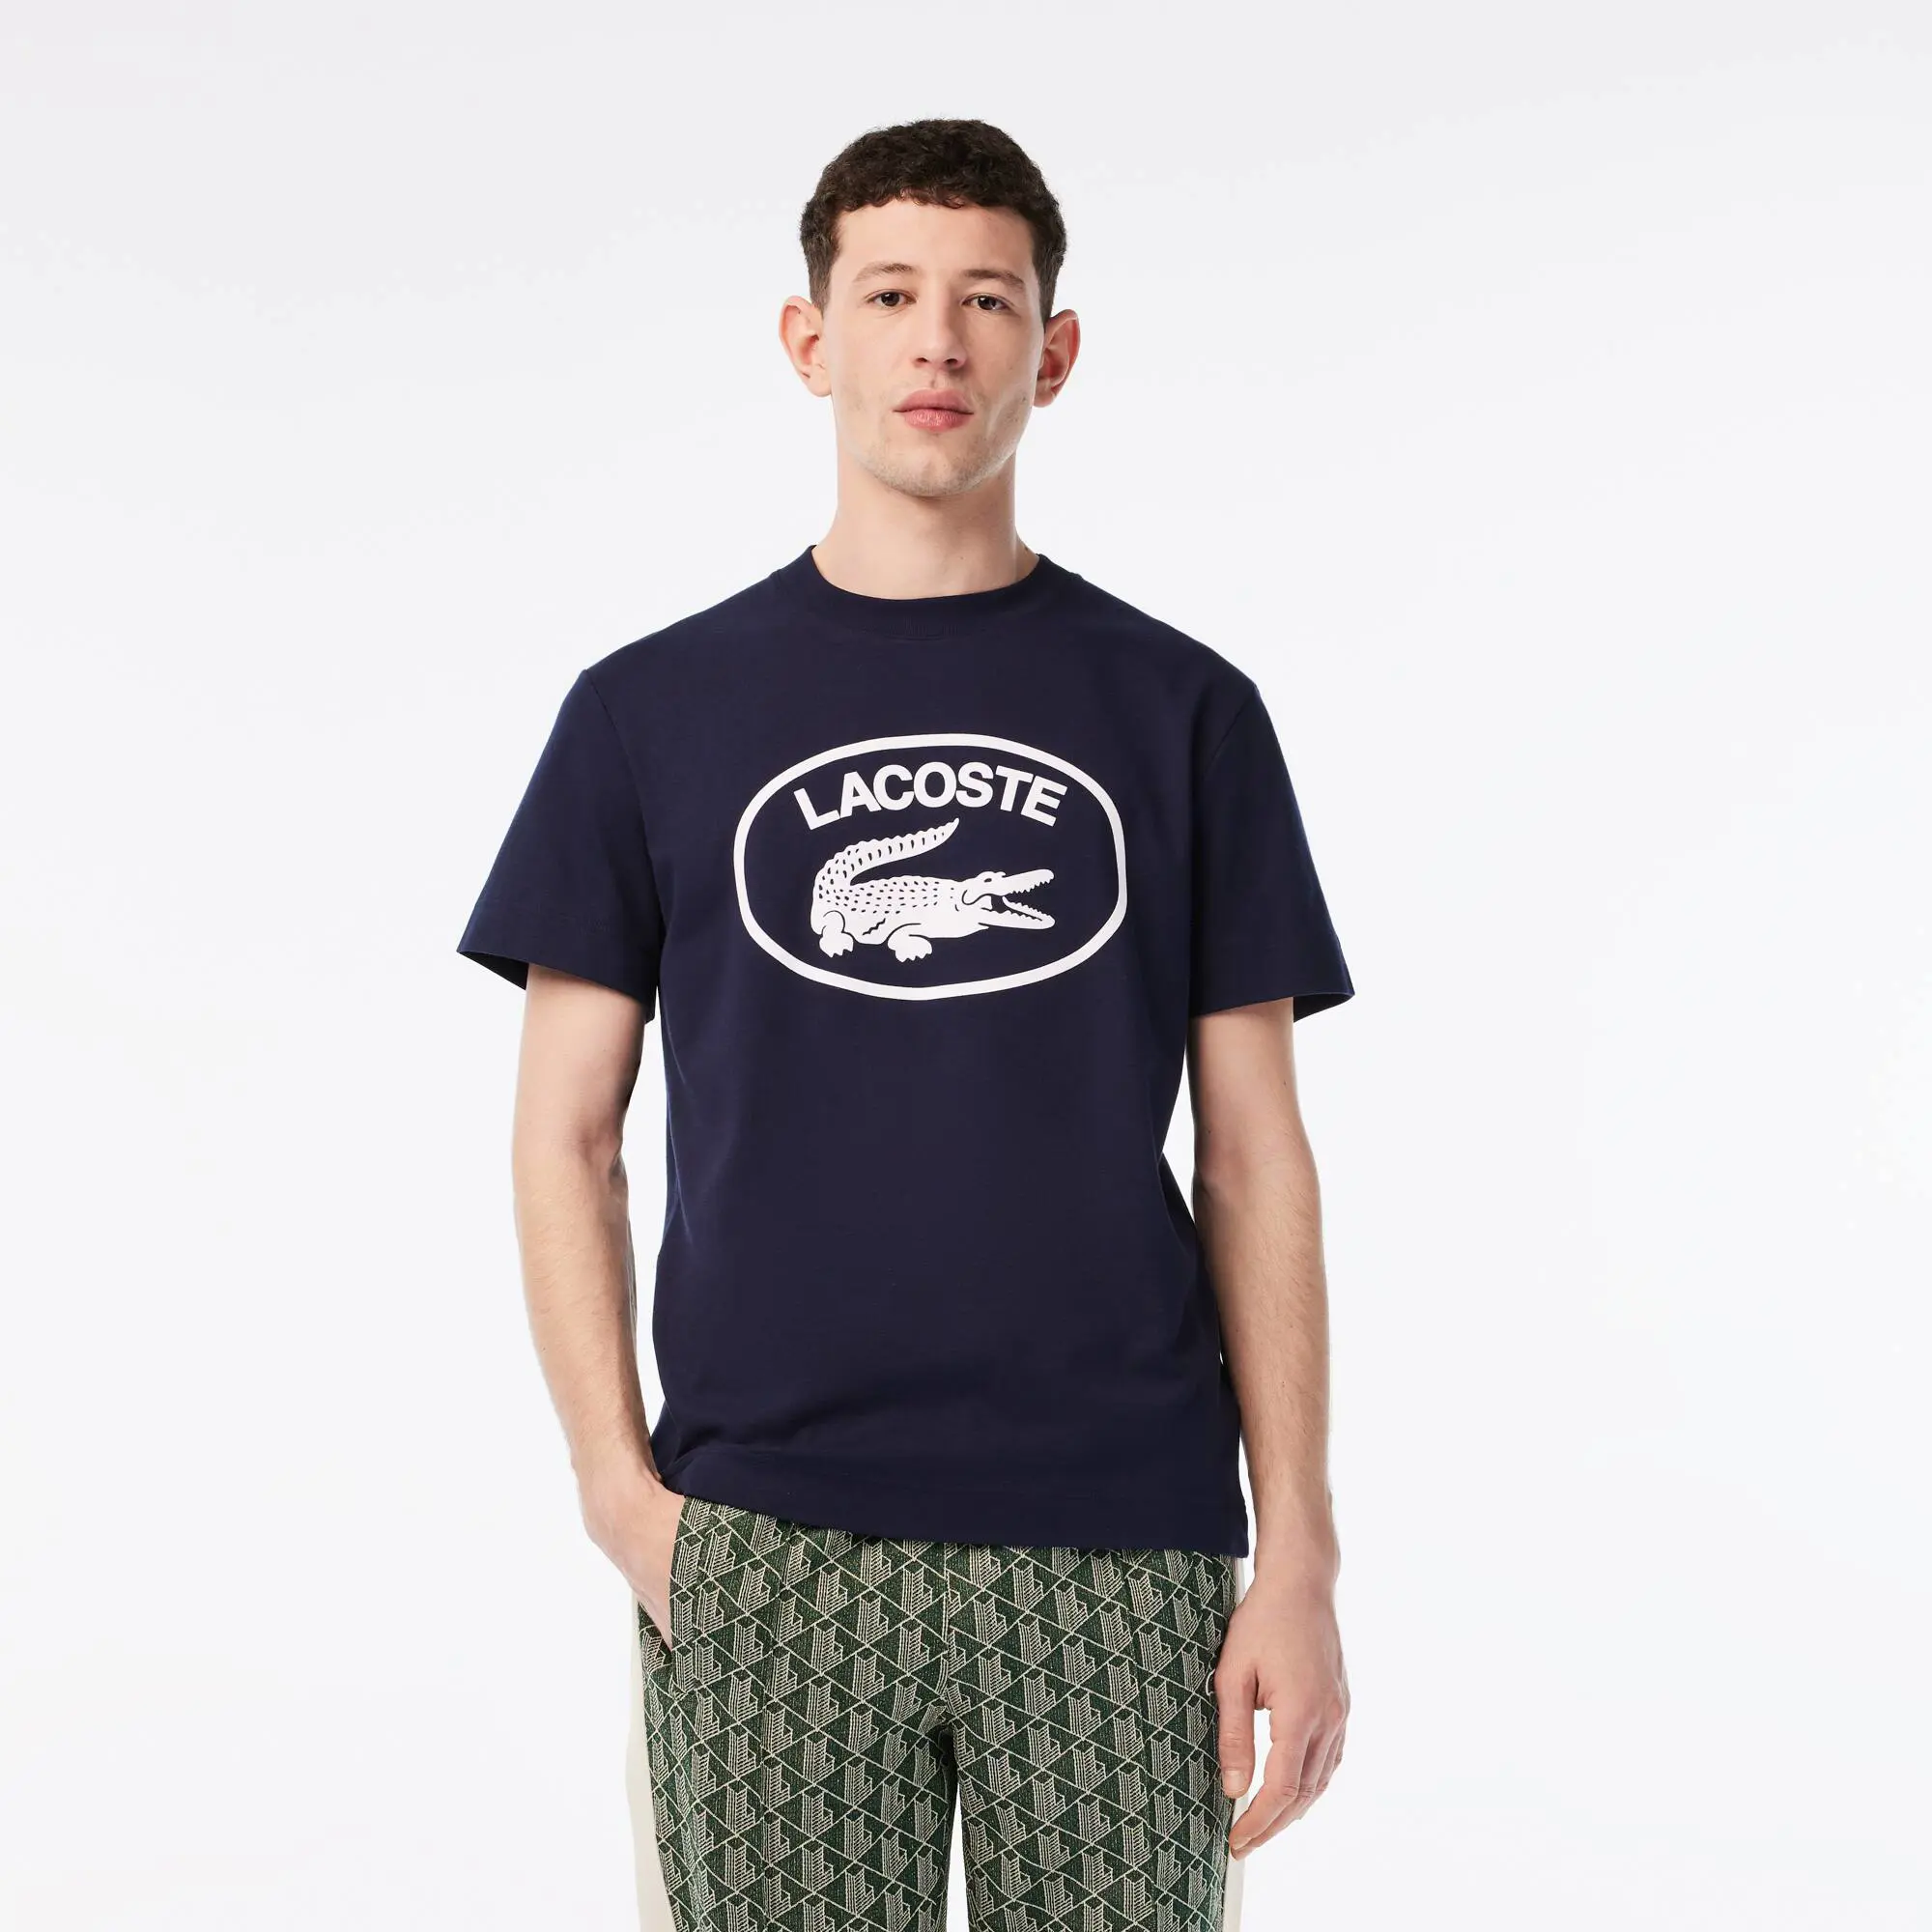 Lacoste Men's Relaxed Fit Branded Cotton T-Shirt. 1